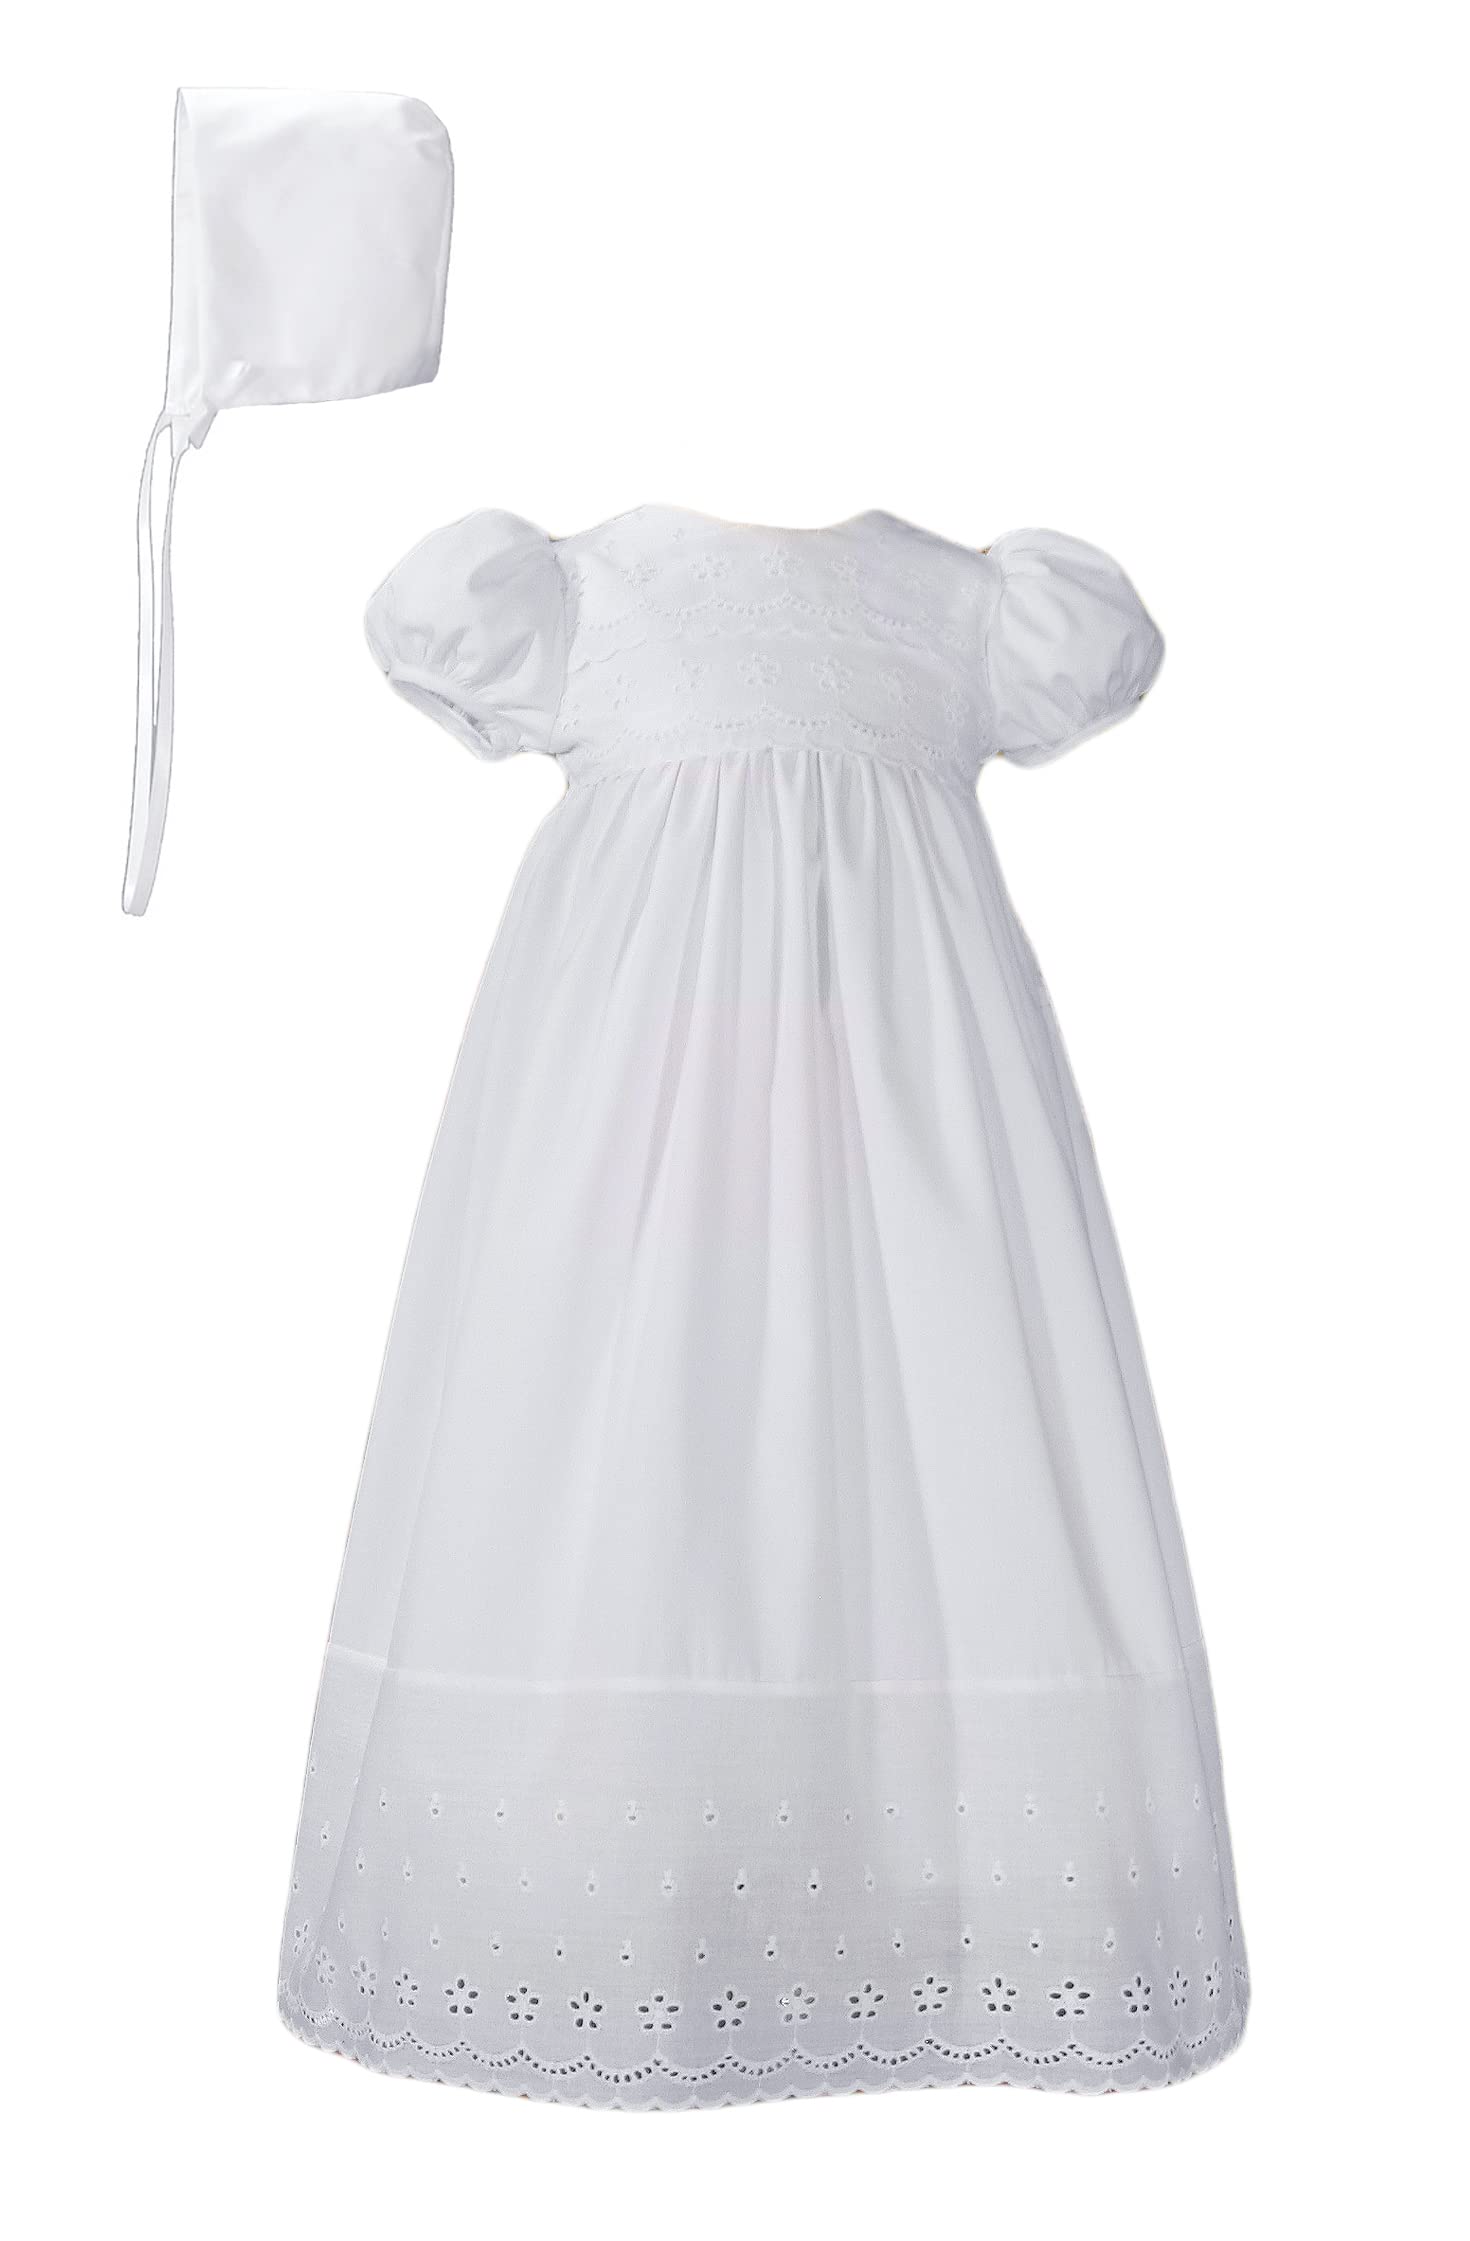 White Cotton Christening Baptism Gown with Lace Border with Bonnet